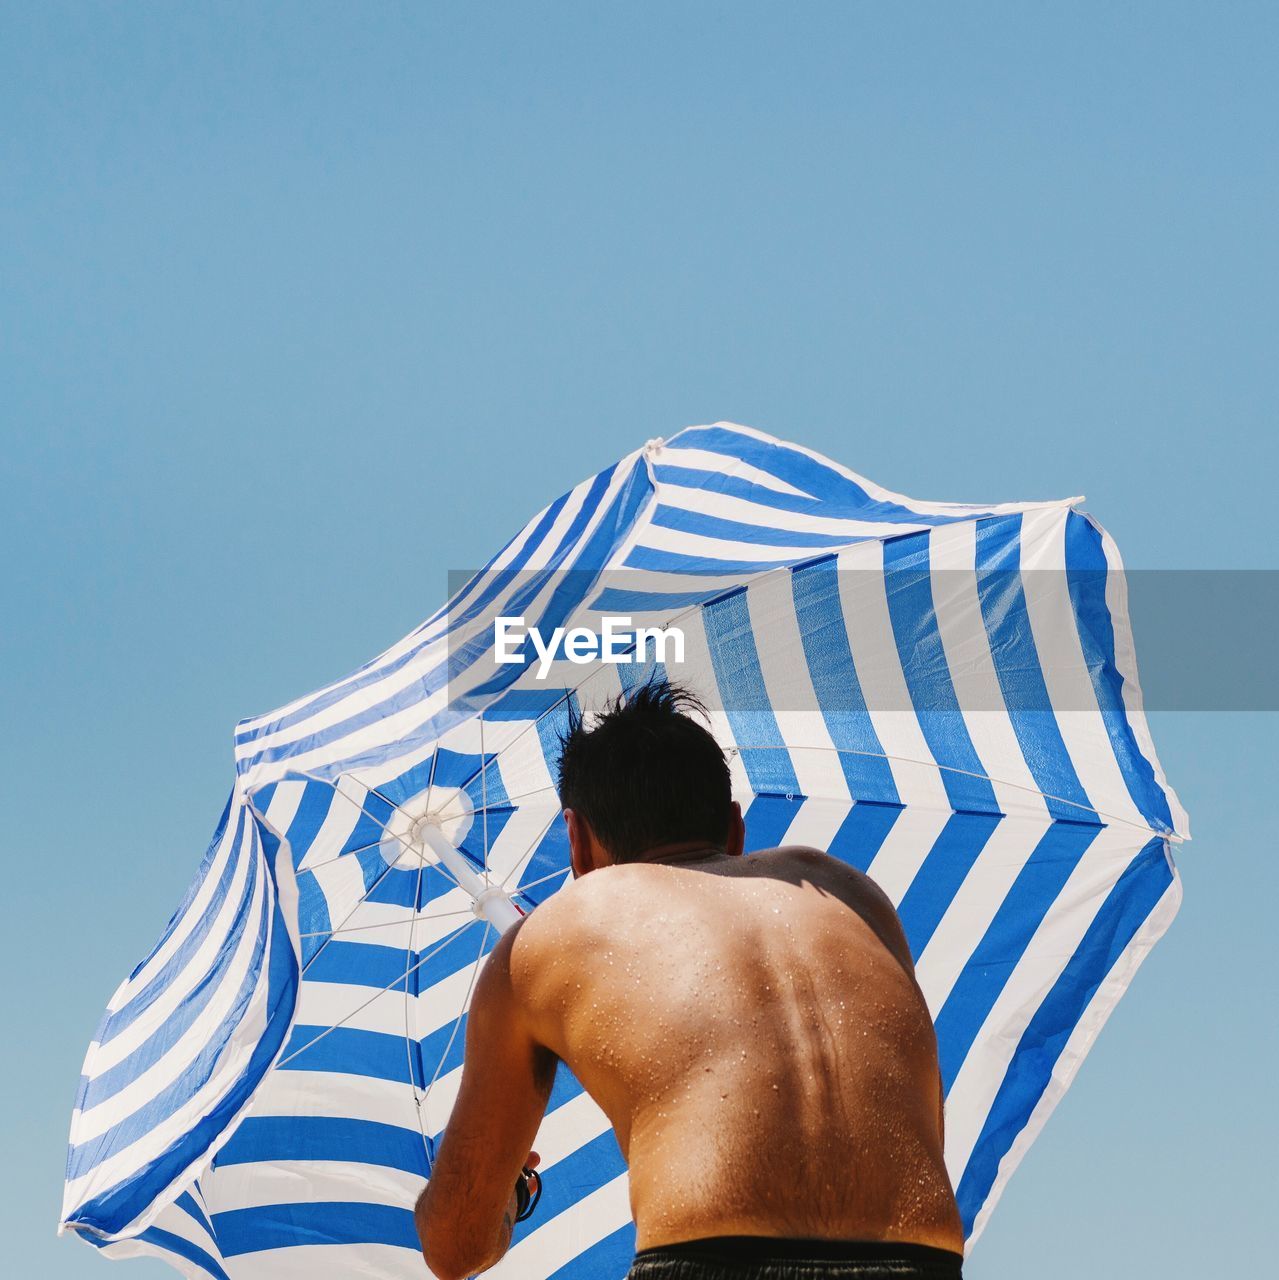 Low angle view of person holding beach umbrella against clear blue sky